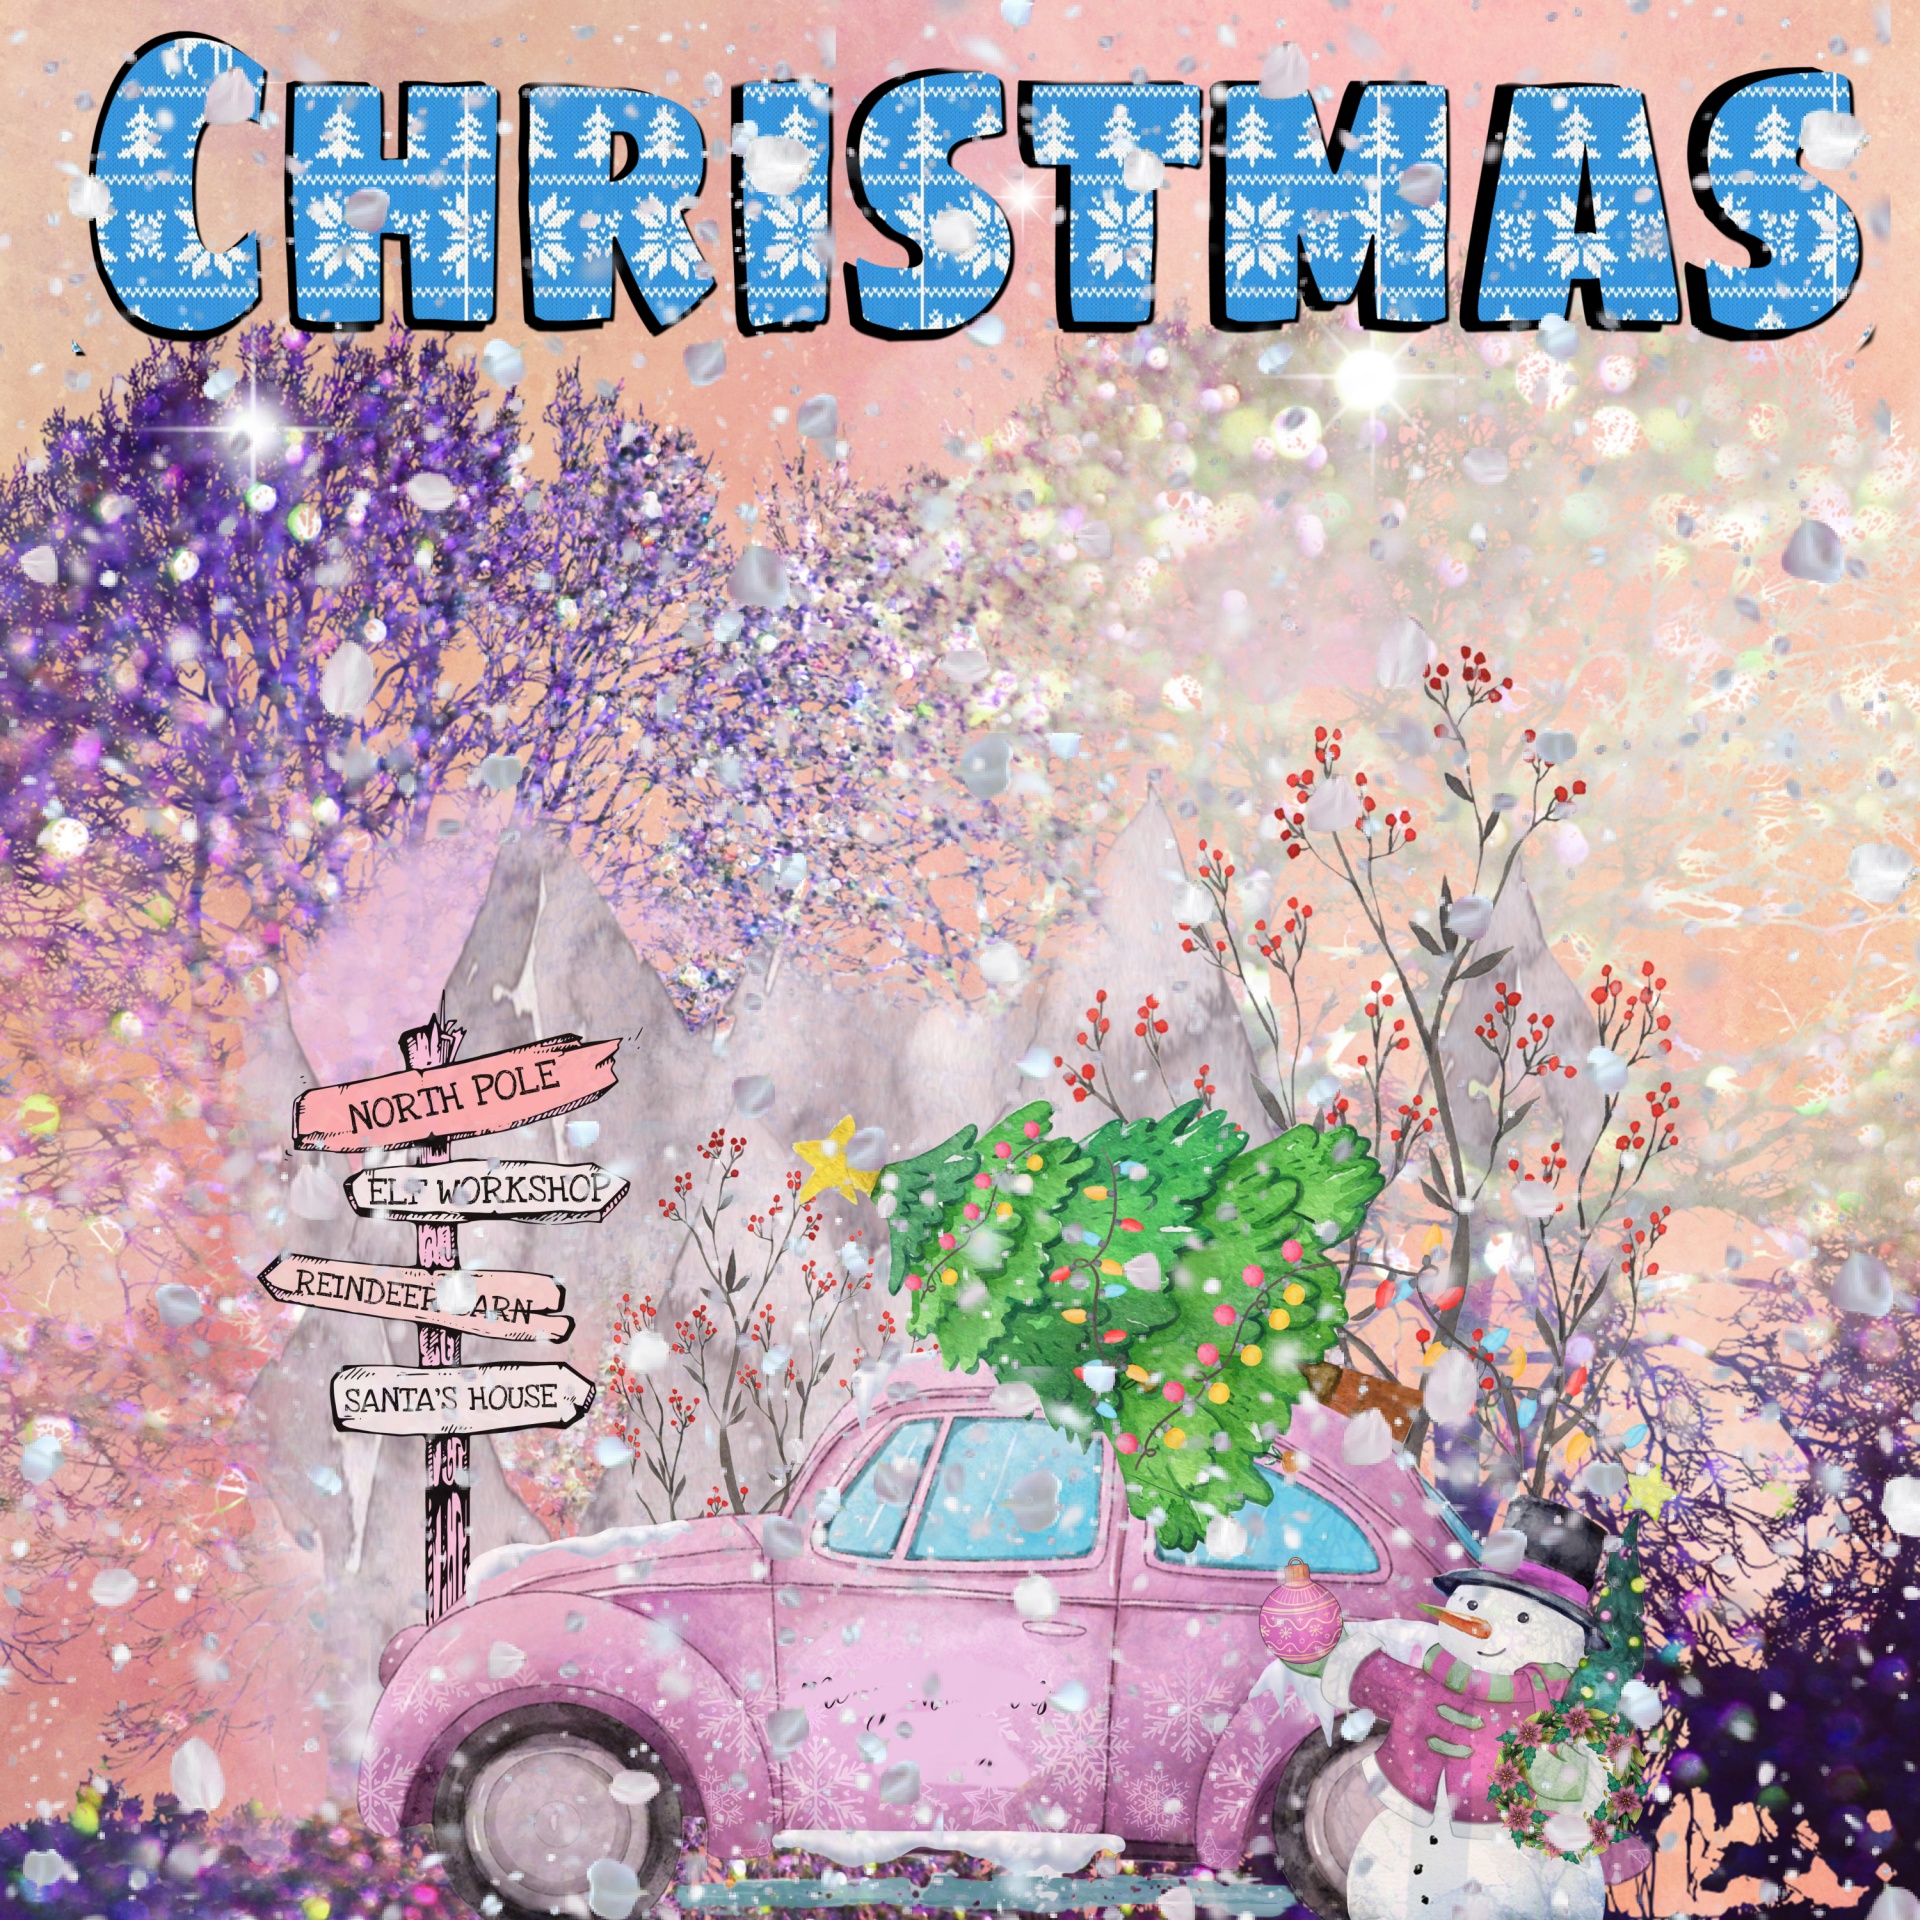 watercolor illustration of a cute beetle bug car with a tree on top, a snowman by its side on a background of glittering wintry snow in pink hues